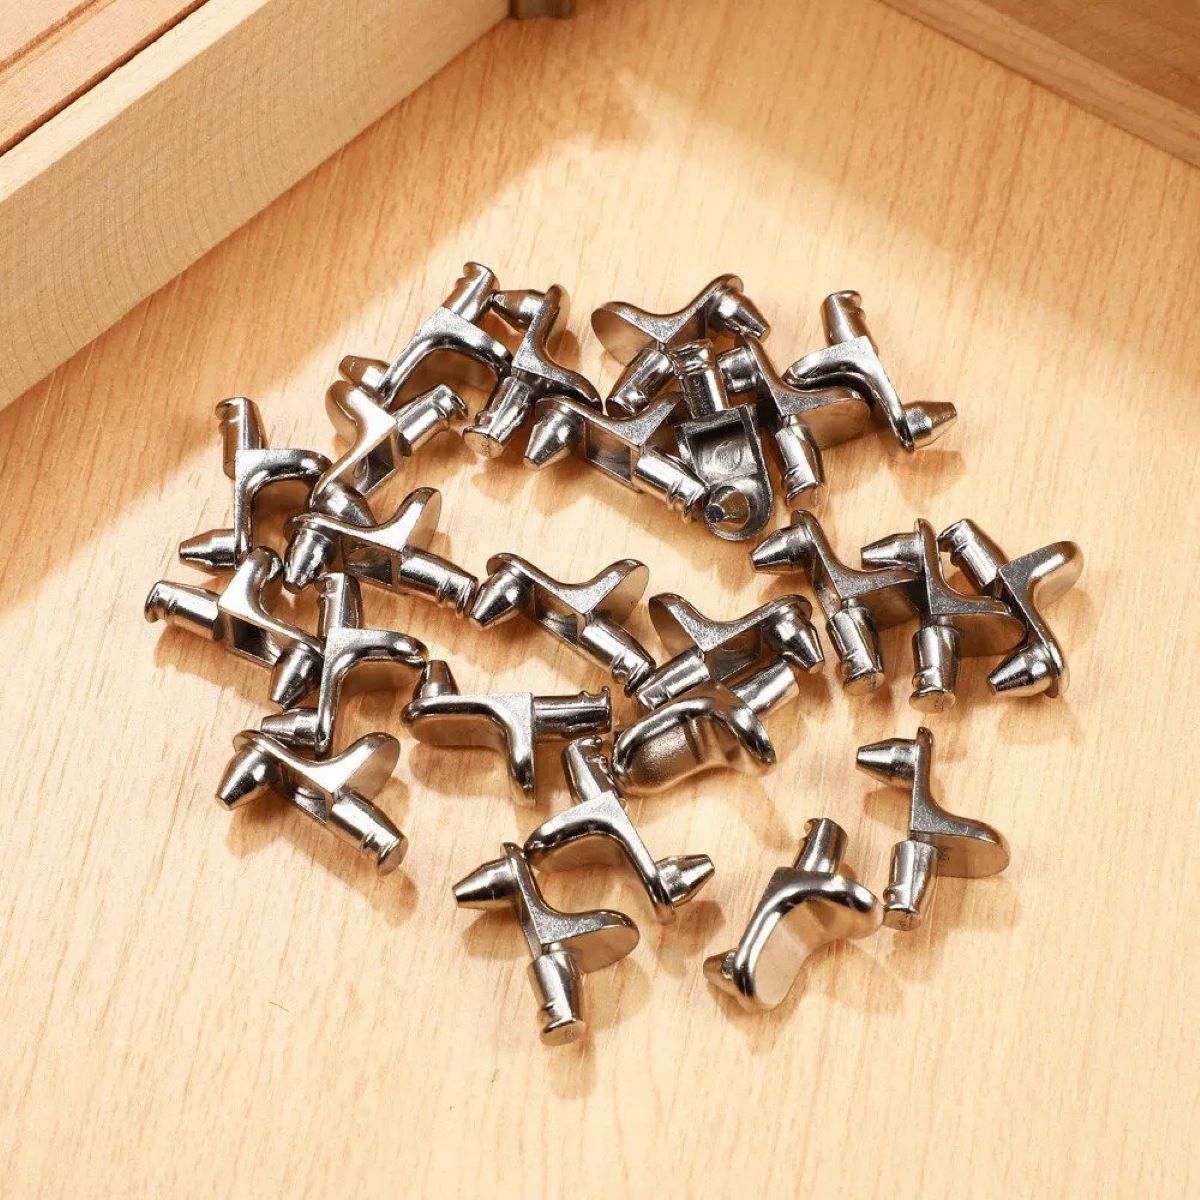  82 Pieces 5 Styles Shelf Pegs Kit, Bookcase Shelf Pegs,  Kindroufly Metal Shelf Pegs, Adjustable Shelf Pins, Cabinet Pins for Shelves,  Cabinets, Wood Shelving : Tools & Home Improvement